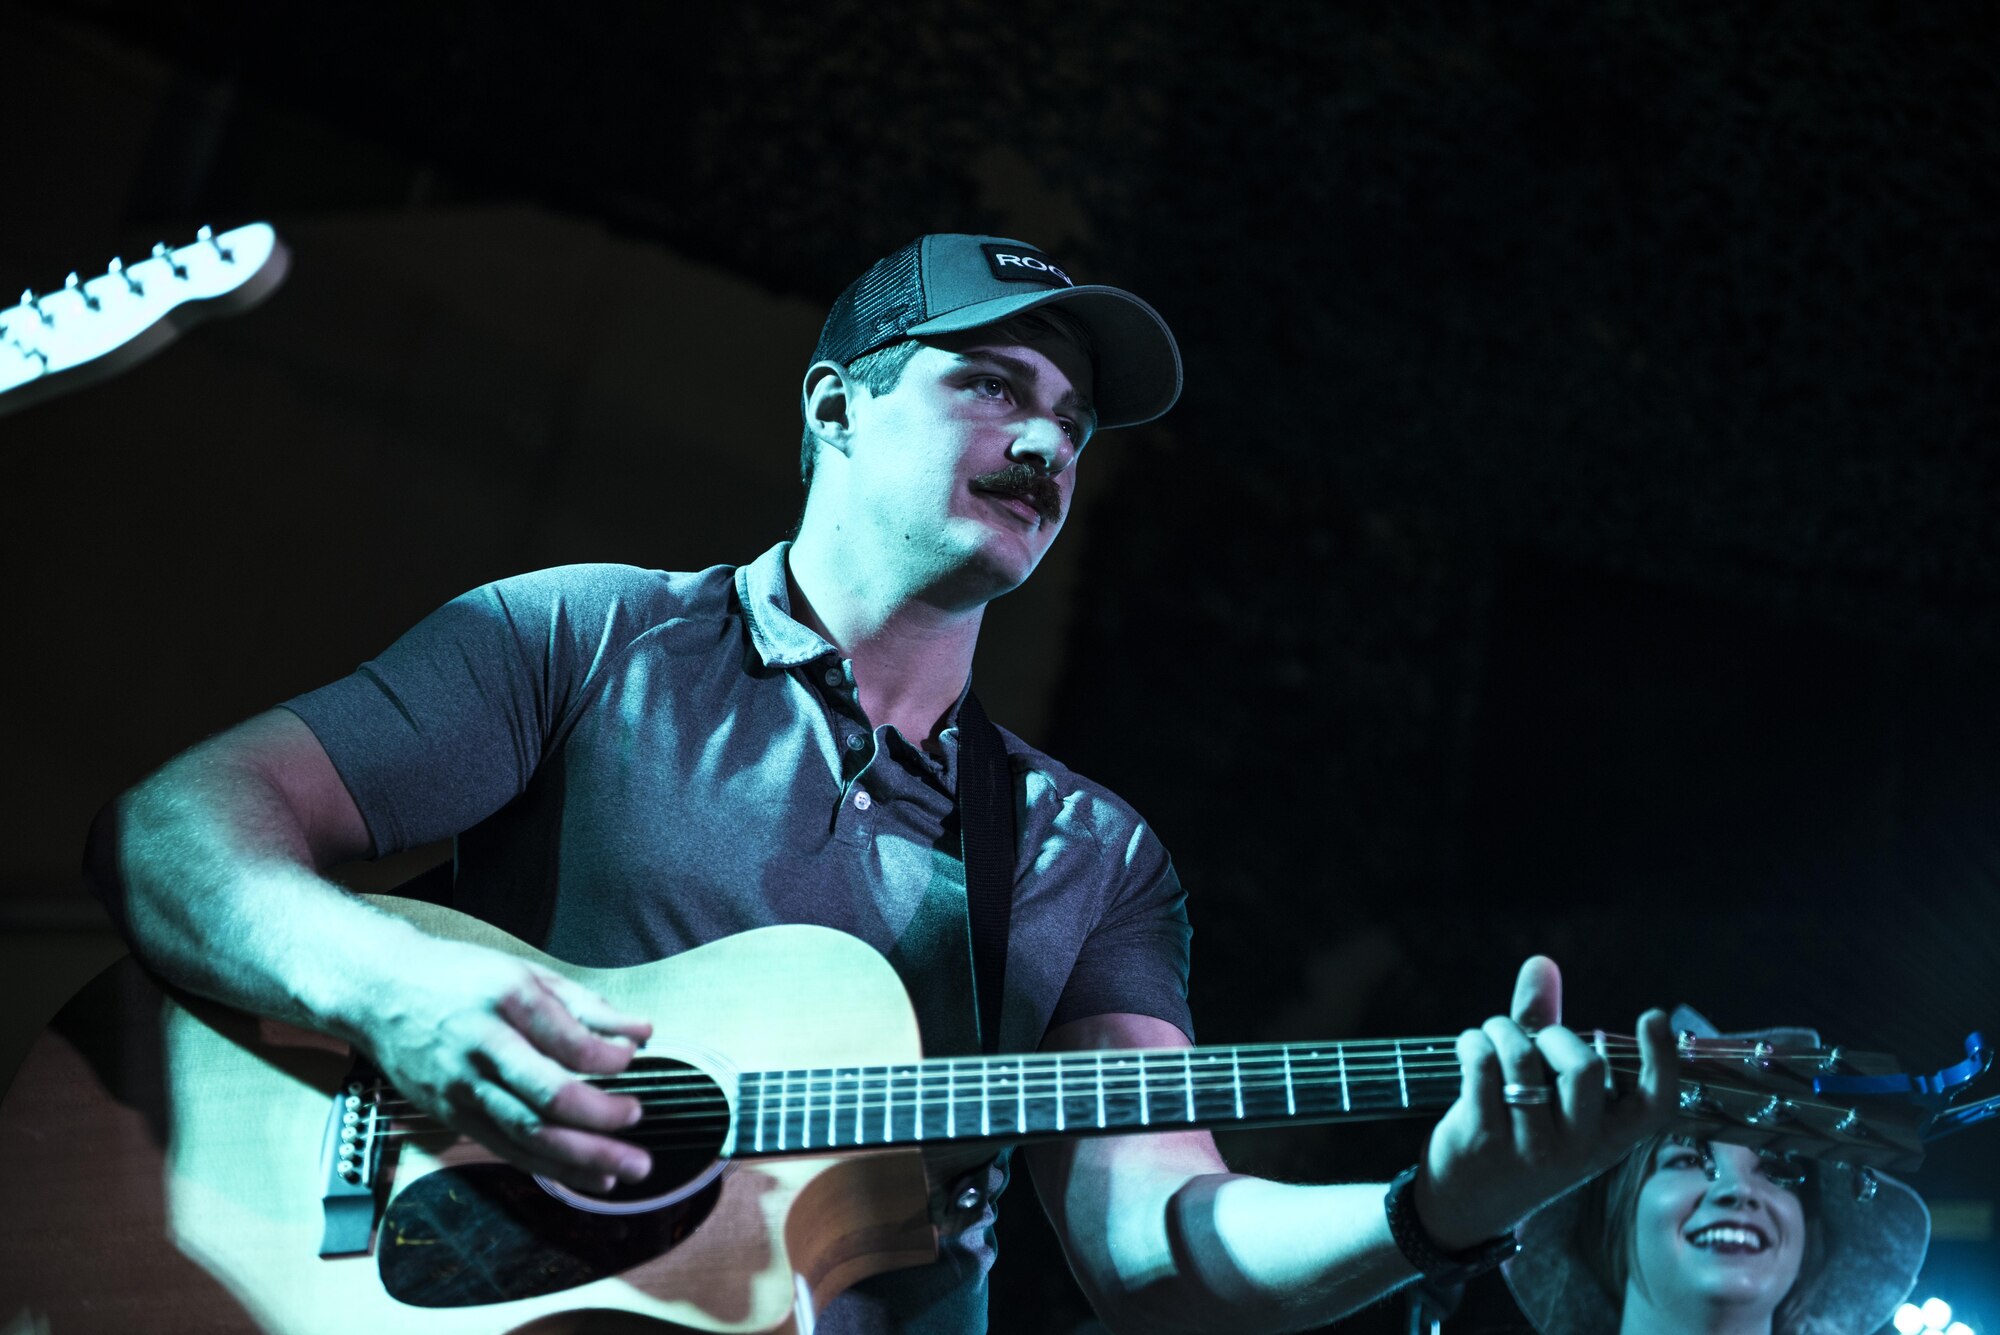 U.S. Air Force Capt. Cory Howe, assigned to the 332nd Air Expeditionary Wing, performs alongside other Coalition service members during an Oktoberfest celebration Sept. 24, 2017, in Southwest Asia. The group teamed up on a number of modern and classic hits from across the U.S. and Europe. (U.S. Air Force photo by Senior Airman Joshua Kleinholz)